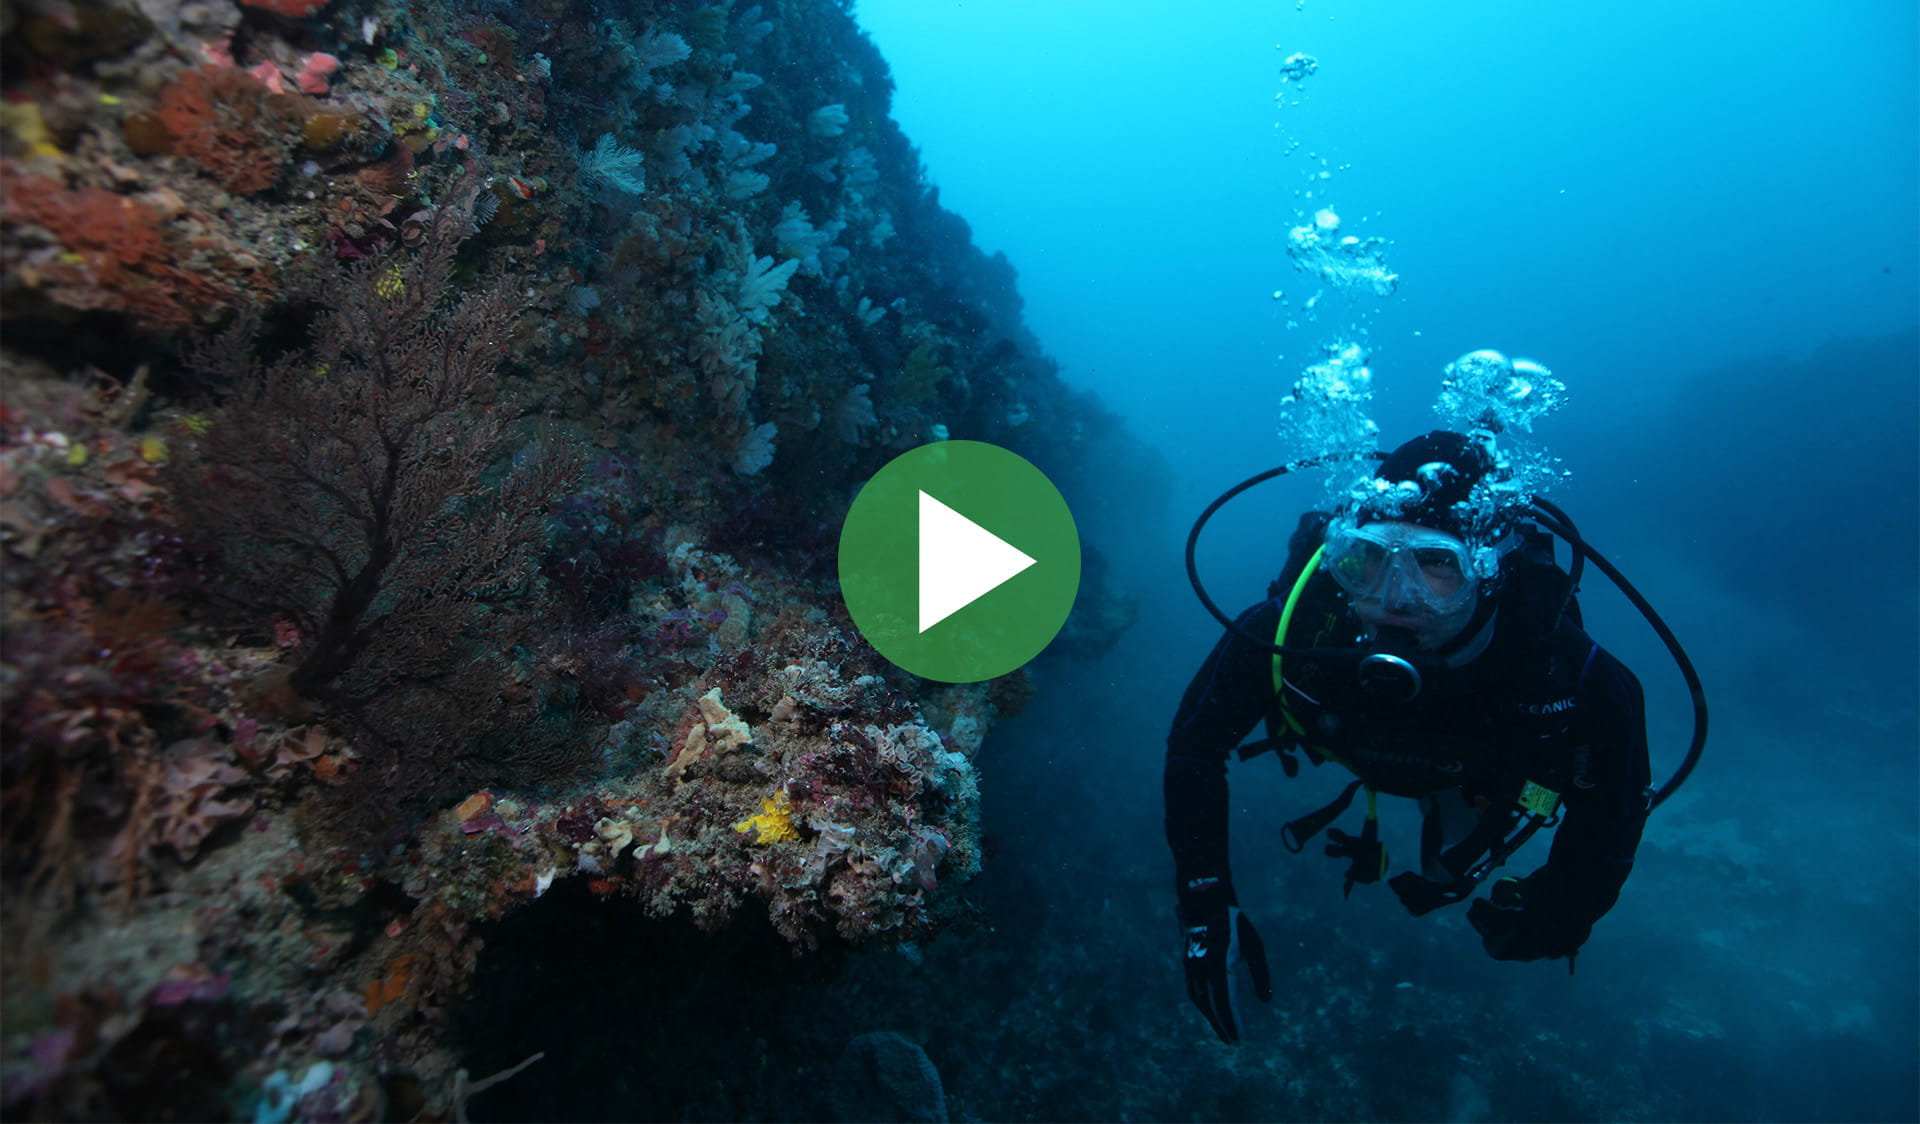 Underwater view of a diver next to a coral reef with video play icon overlay